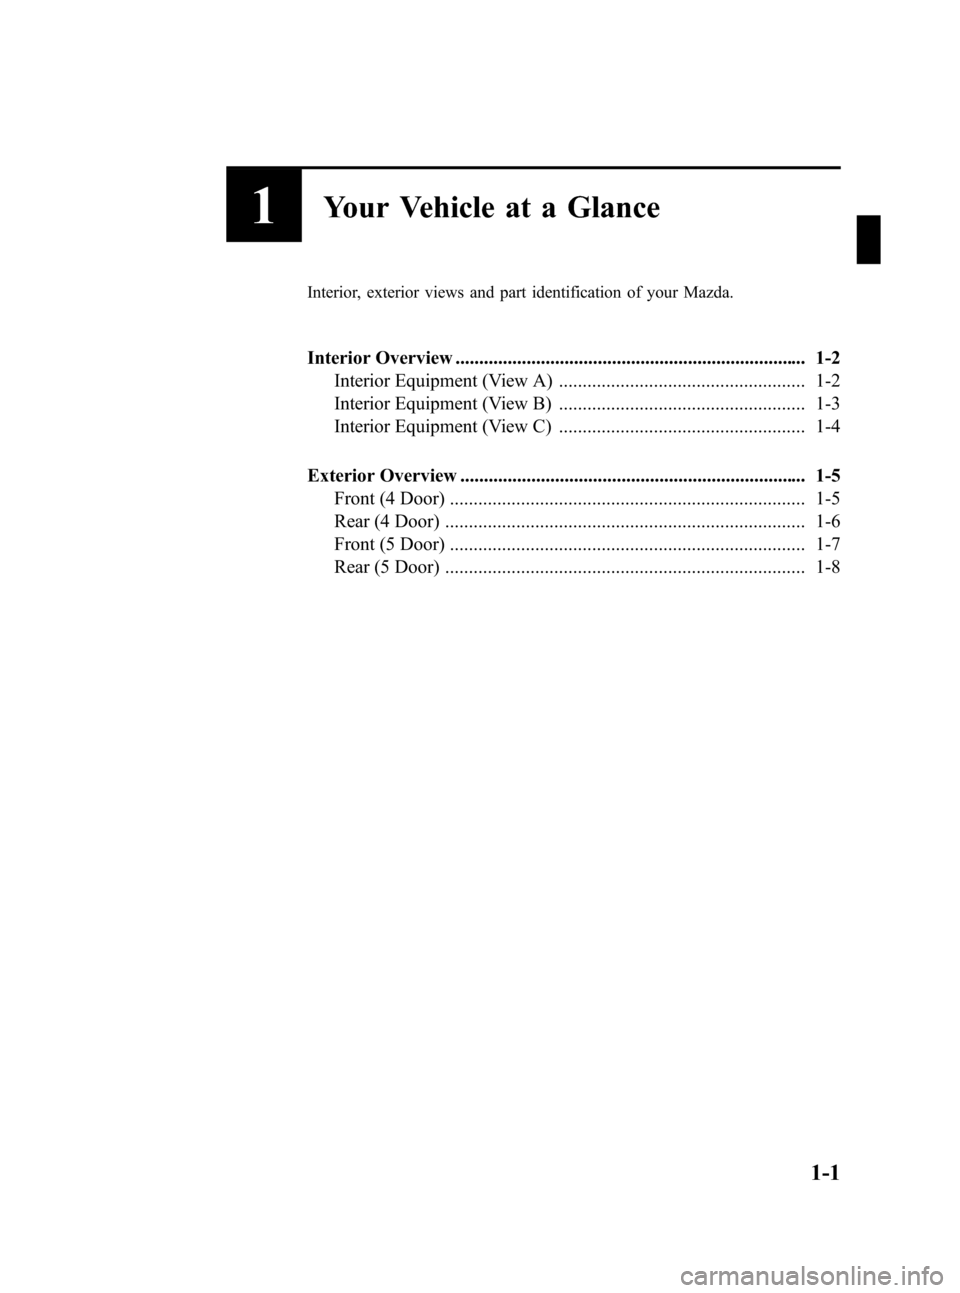 MAZDA MODEL 3 HATCHBACK 2012  Owners Manual (in English) Black plate (7,1)
1Your Vehicle at a Glance
Interior, exterior views and part identification of your Mazda.
Interior Overview ..........................................................................